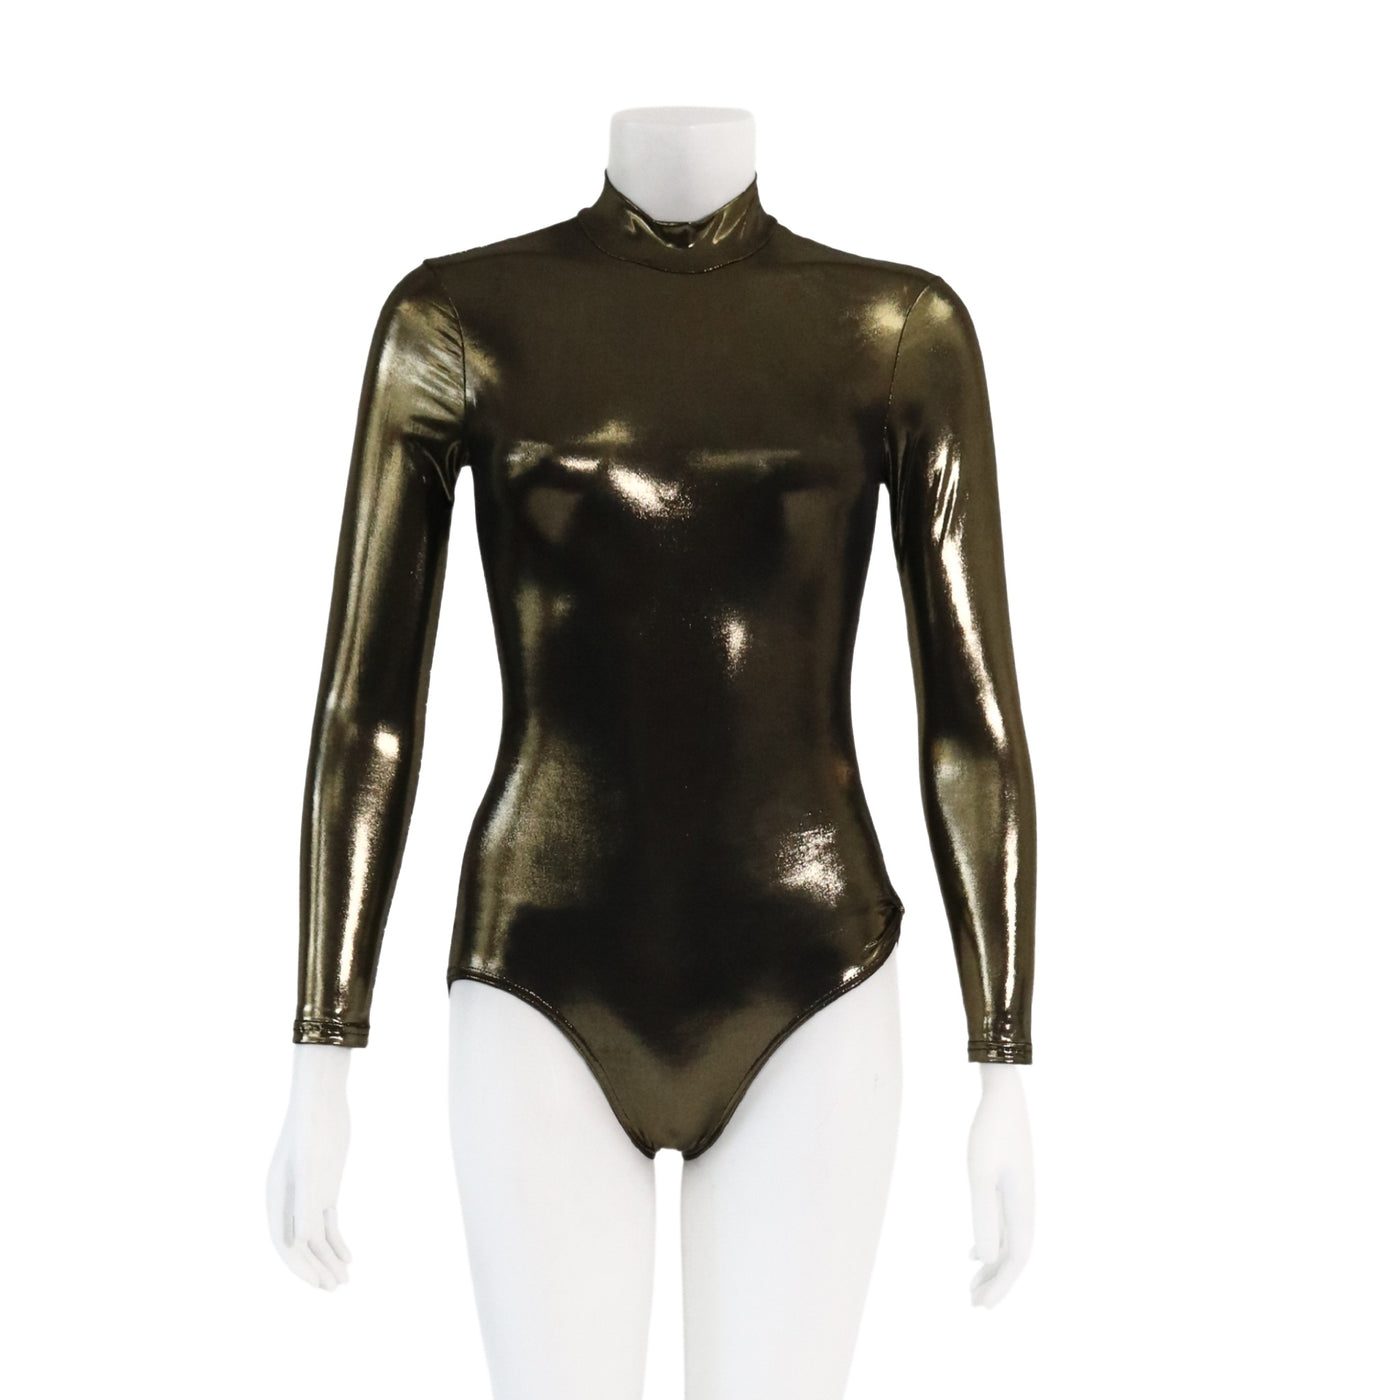 Body Wrappers 'Whitney' Gold Leotard